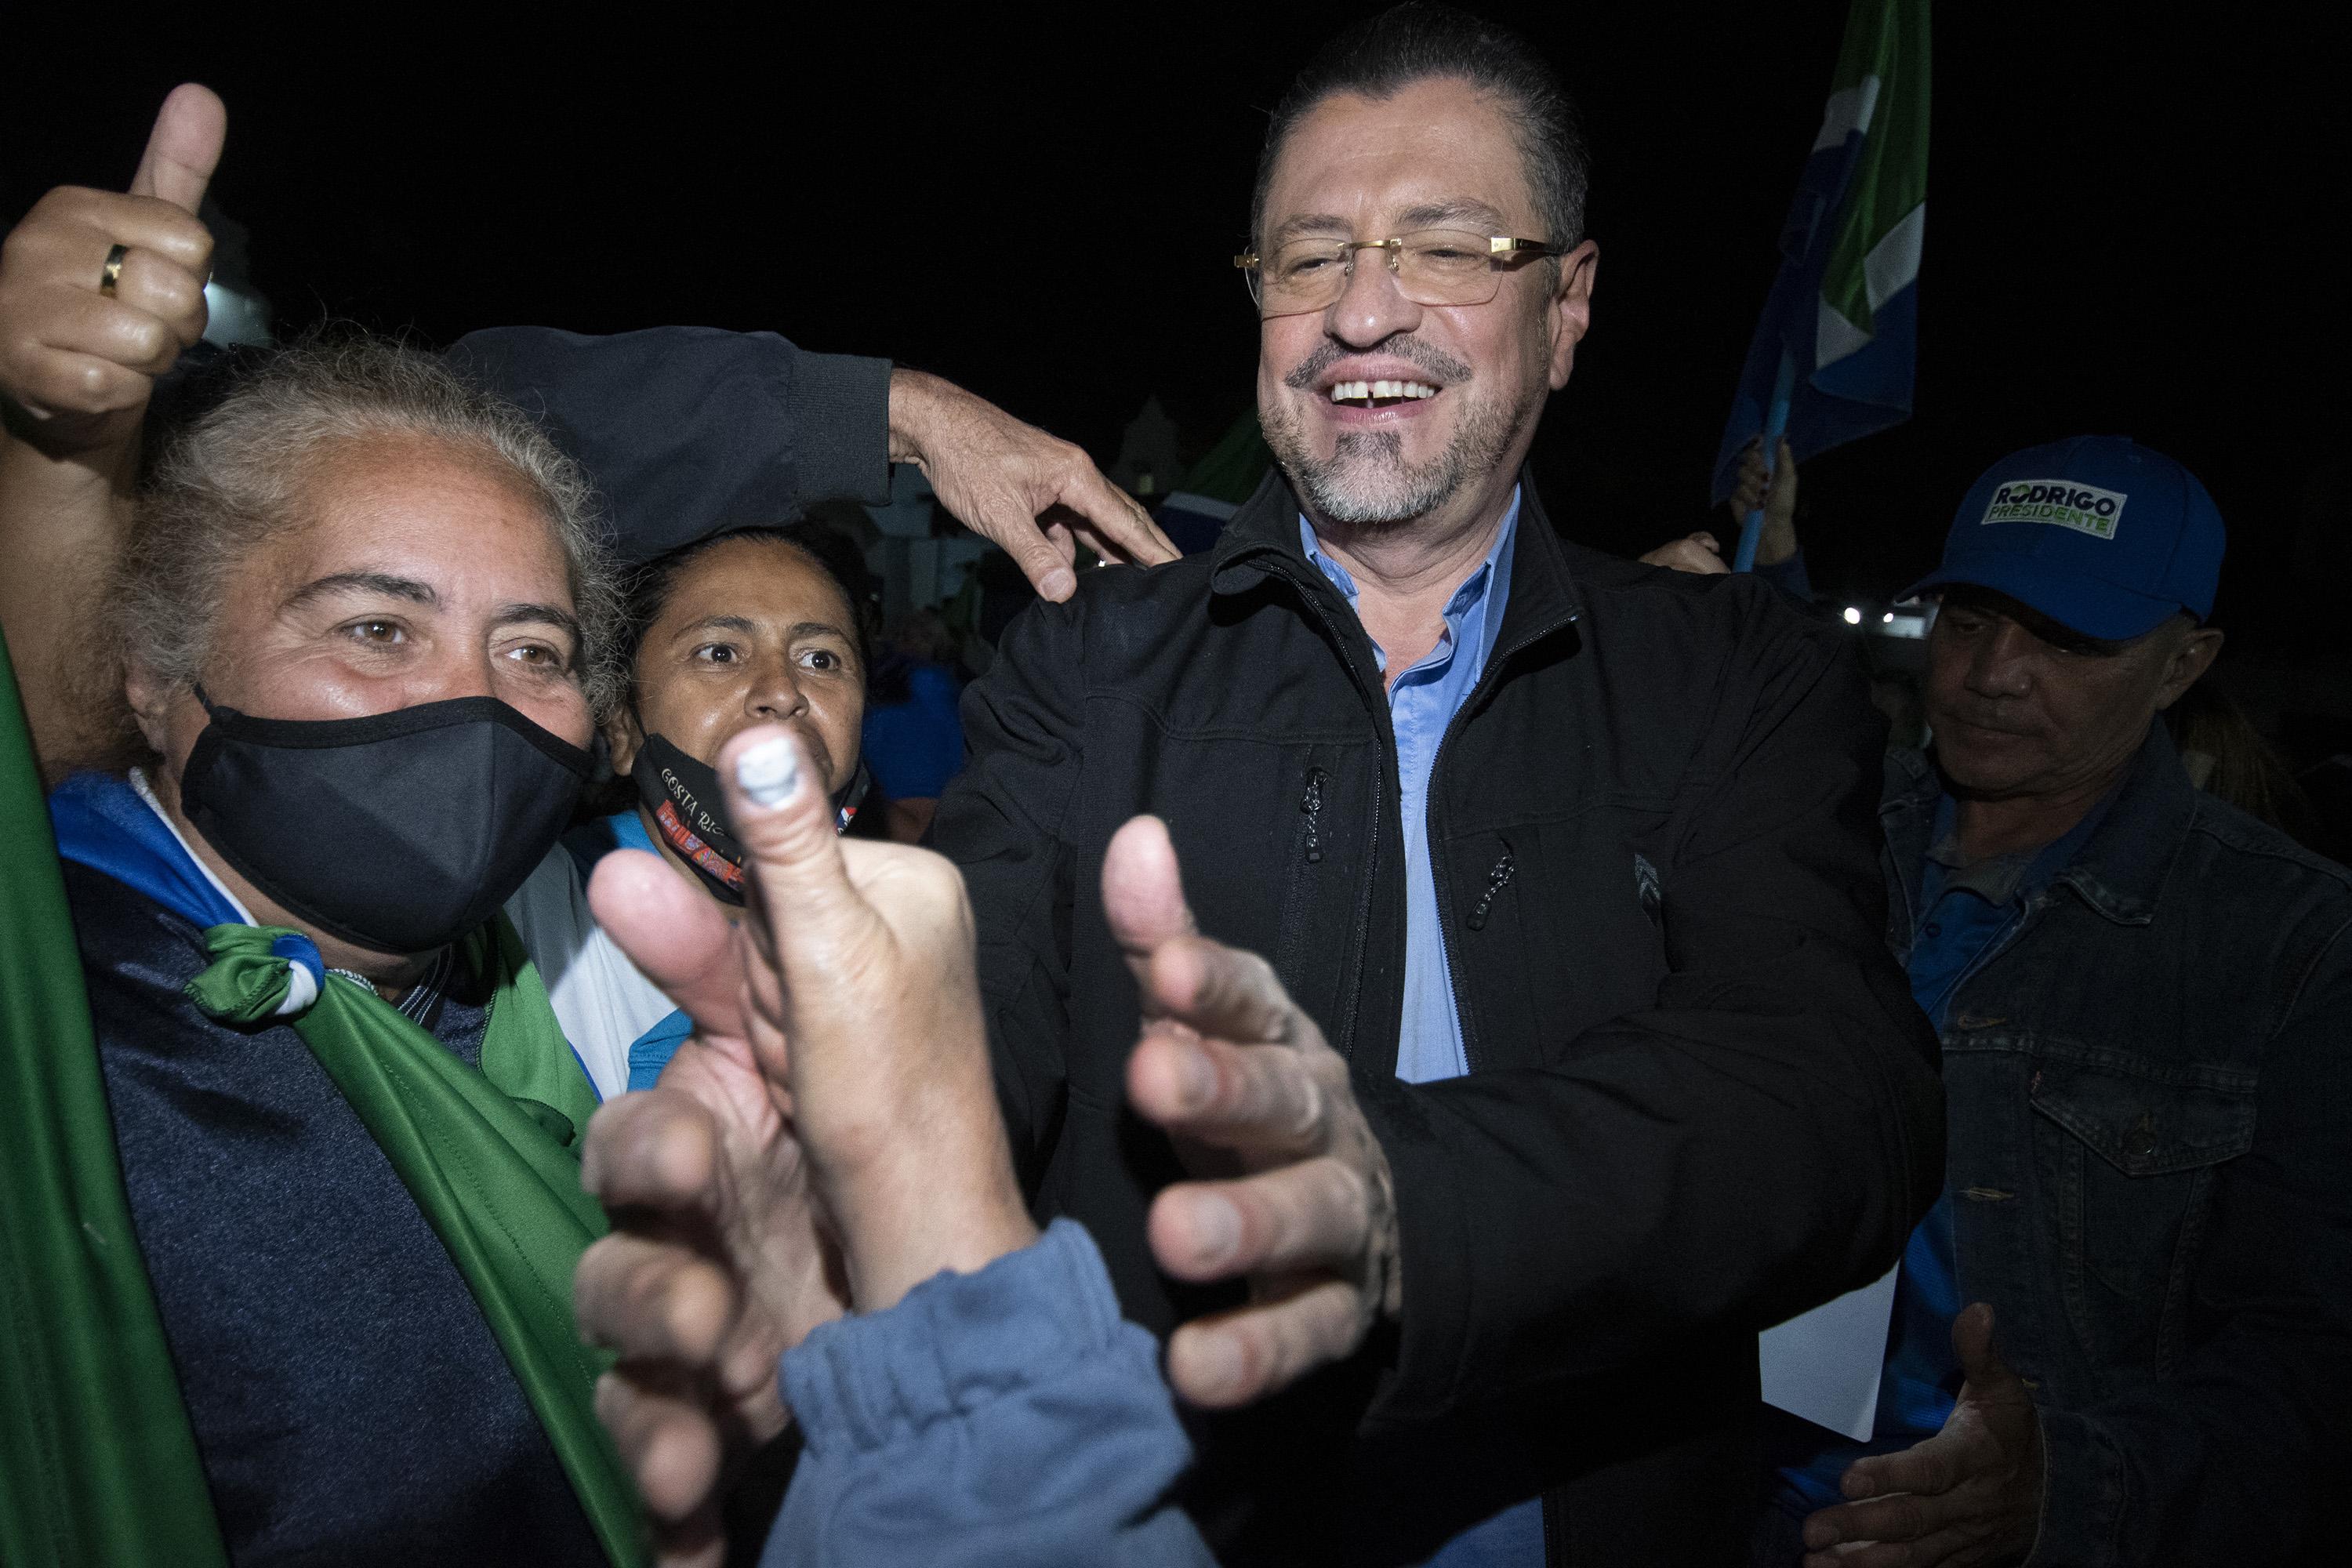 Costa Rican President-Elect Rodrigo Chaves greets supporters of his Social Democratic Progress Party at his closing campaign event in San José on March 25, 2022. Photo: Ezequiel Becerra/AFP